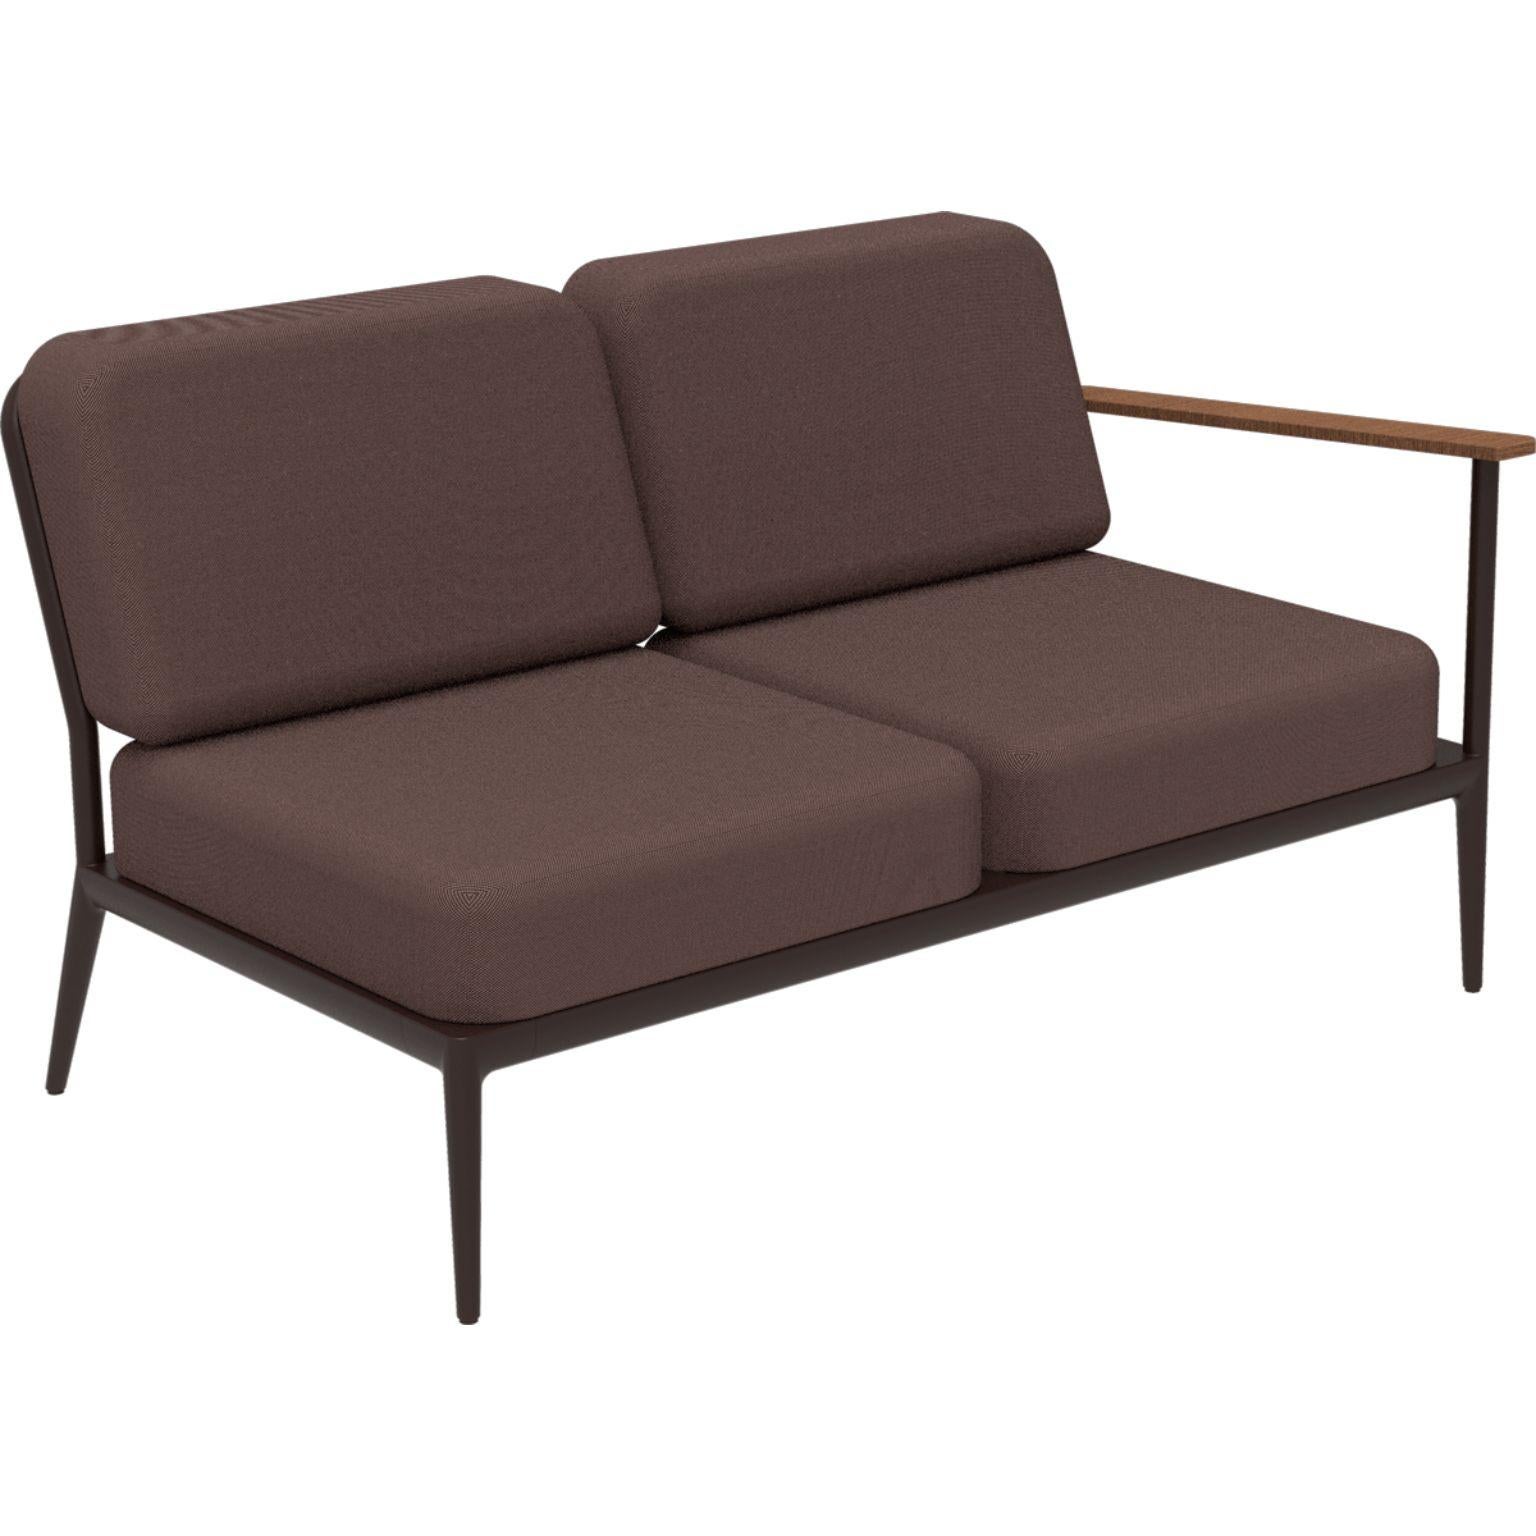 Nature Chocolate Double Left modular sofa by MOWEE
Dimensions: D85 x W144 x H81 cm (seat height 42 cm).
Material: Aluminum, upholstery and Iroko Wood.
Weight: 29 kg.
Also available in different colors and finishes. 

An unmistakable collection